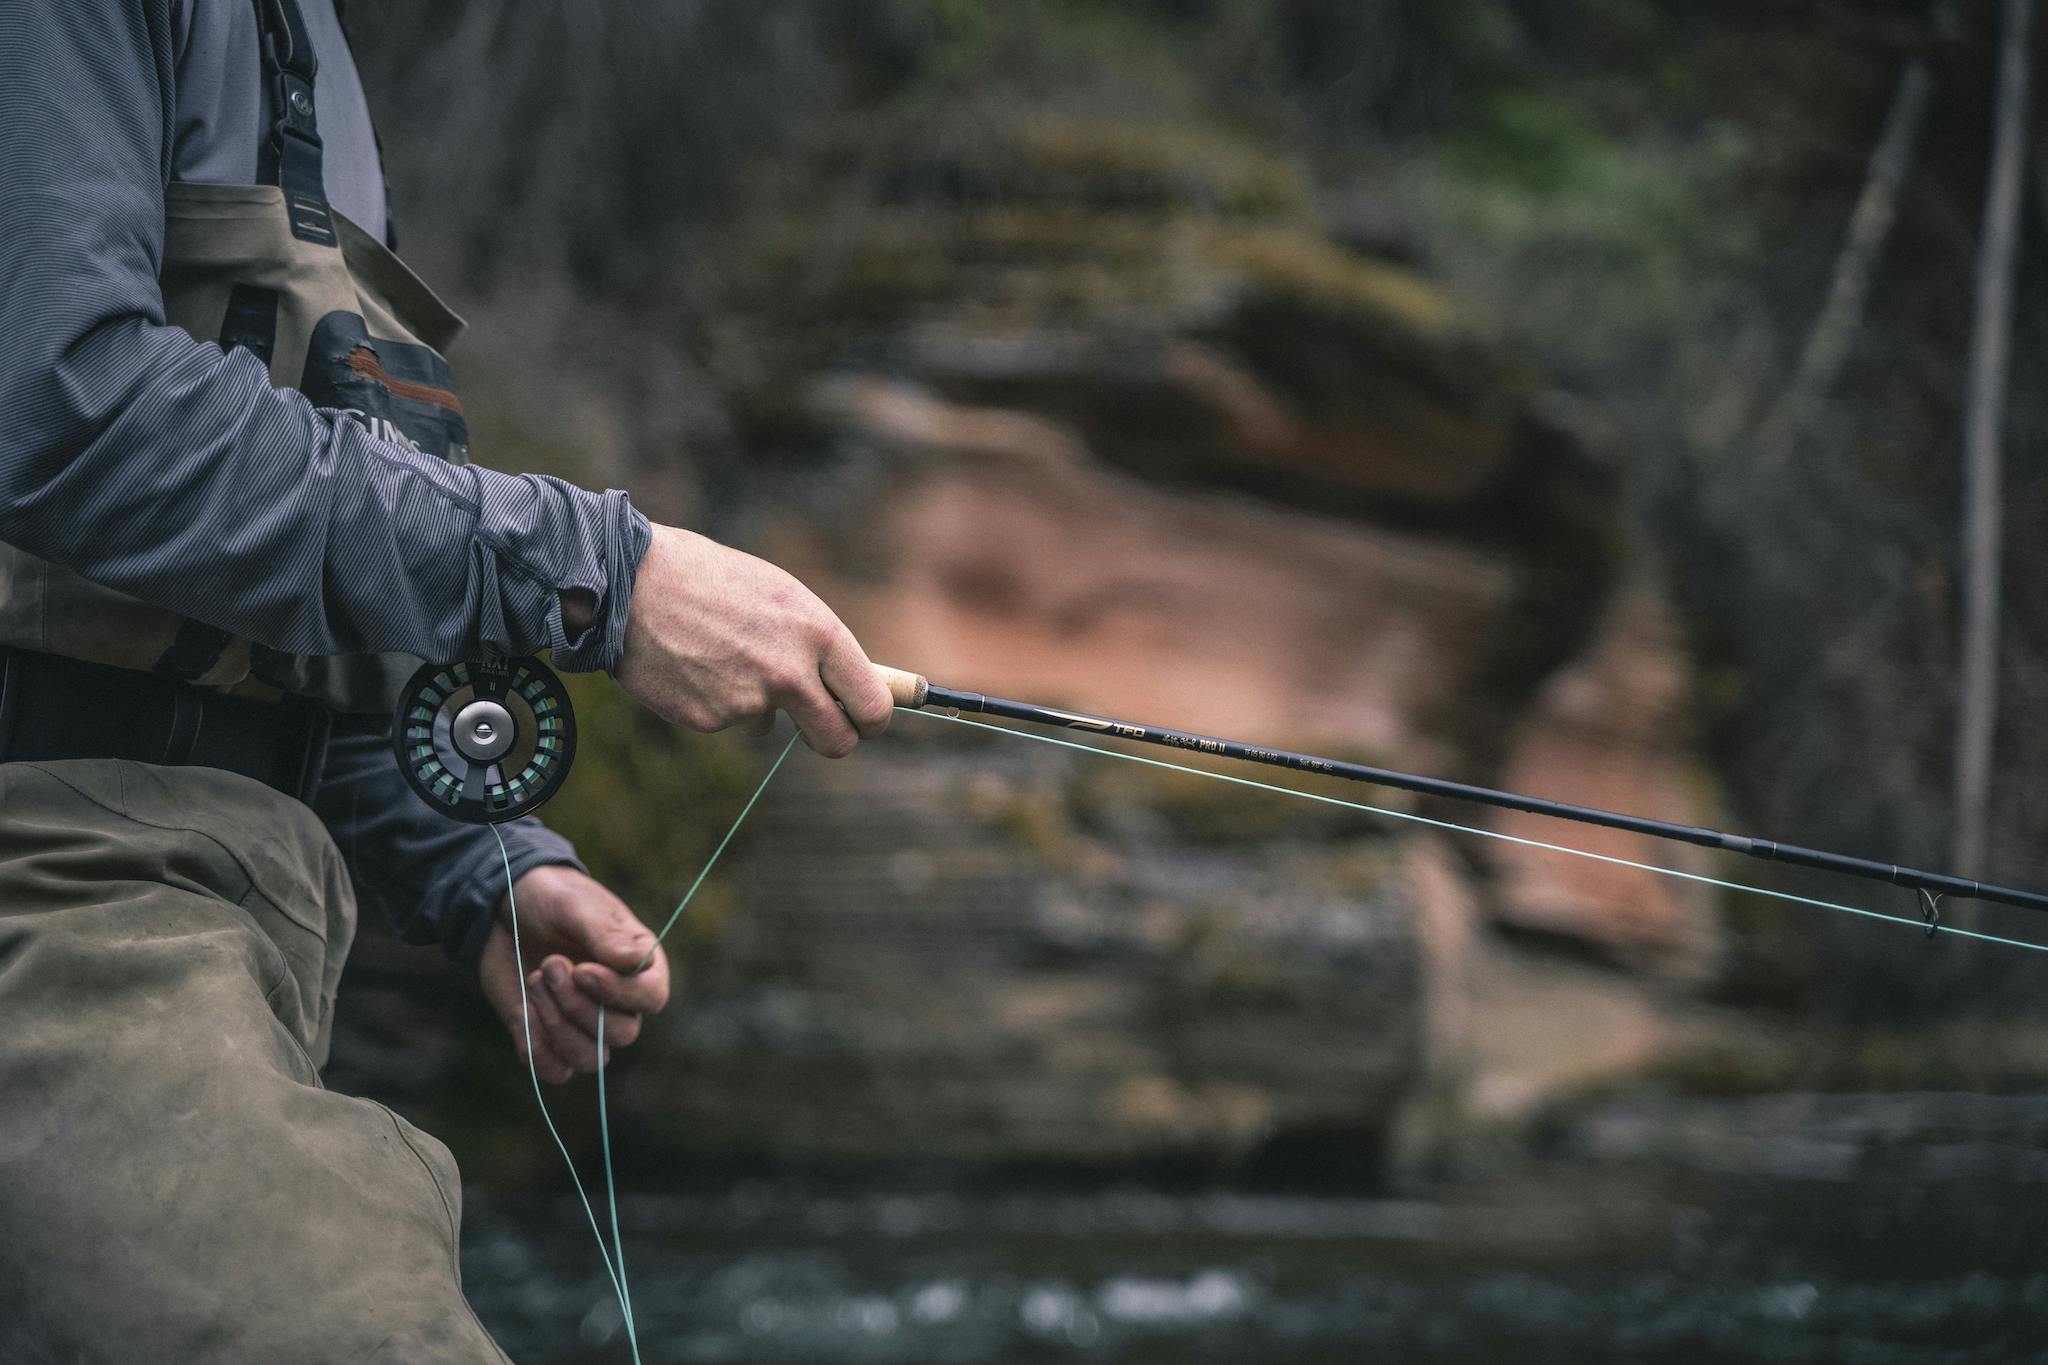 Temple Fork Outfitters Pro 2 Fly Rod · 10' · 6 wt